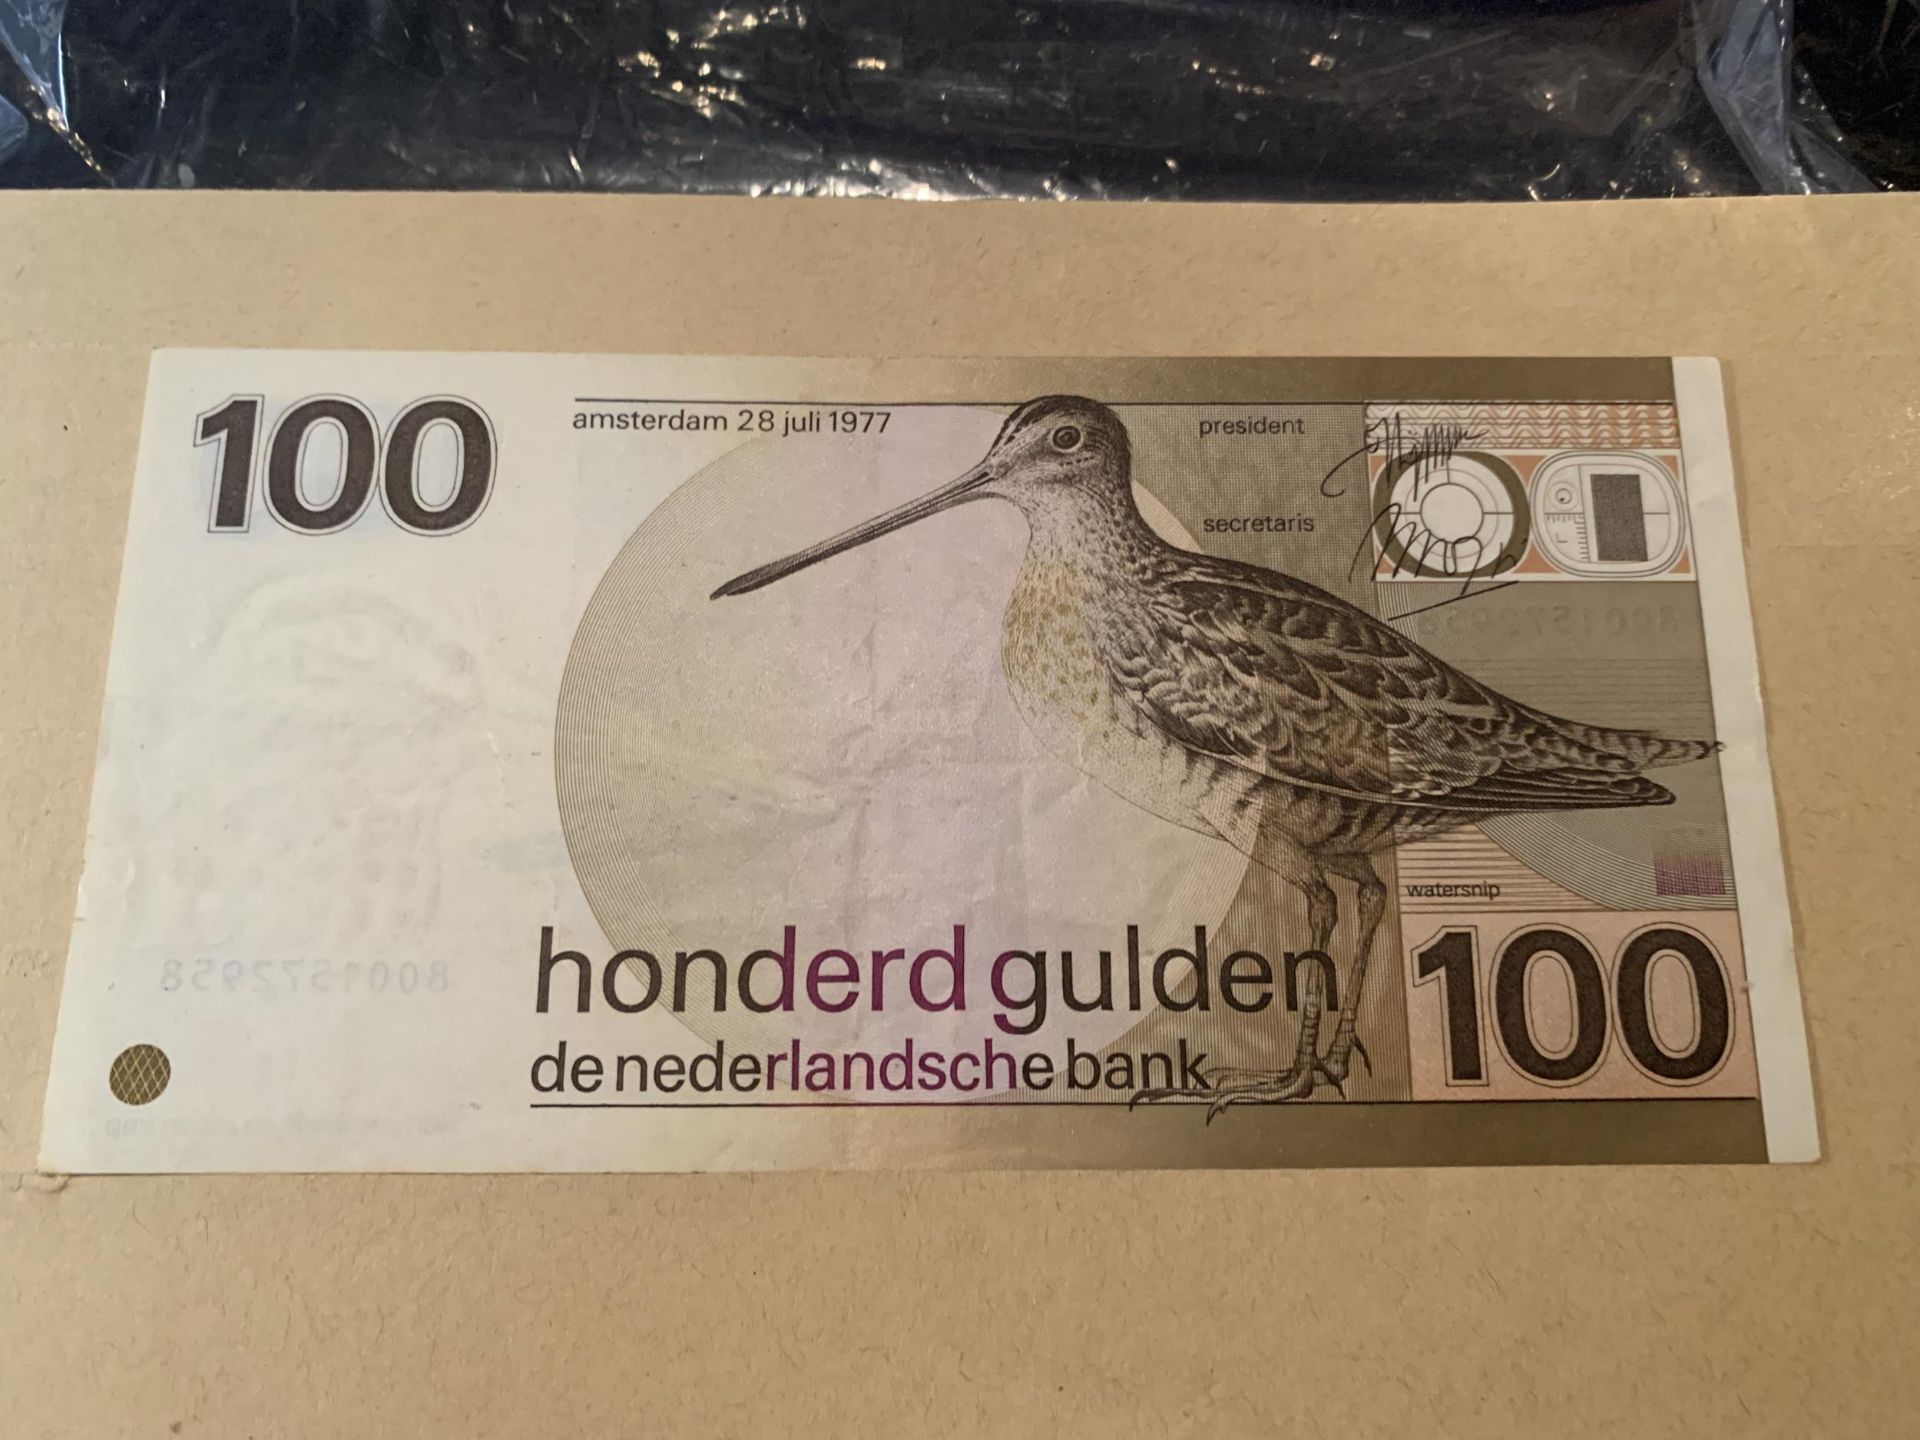 A NETHERLANDS 1977 100 GUILDER BANKNOTE , UNCIRCULATED - Image 2 of 3